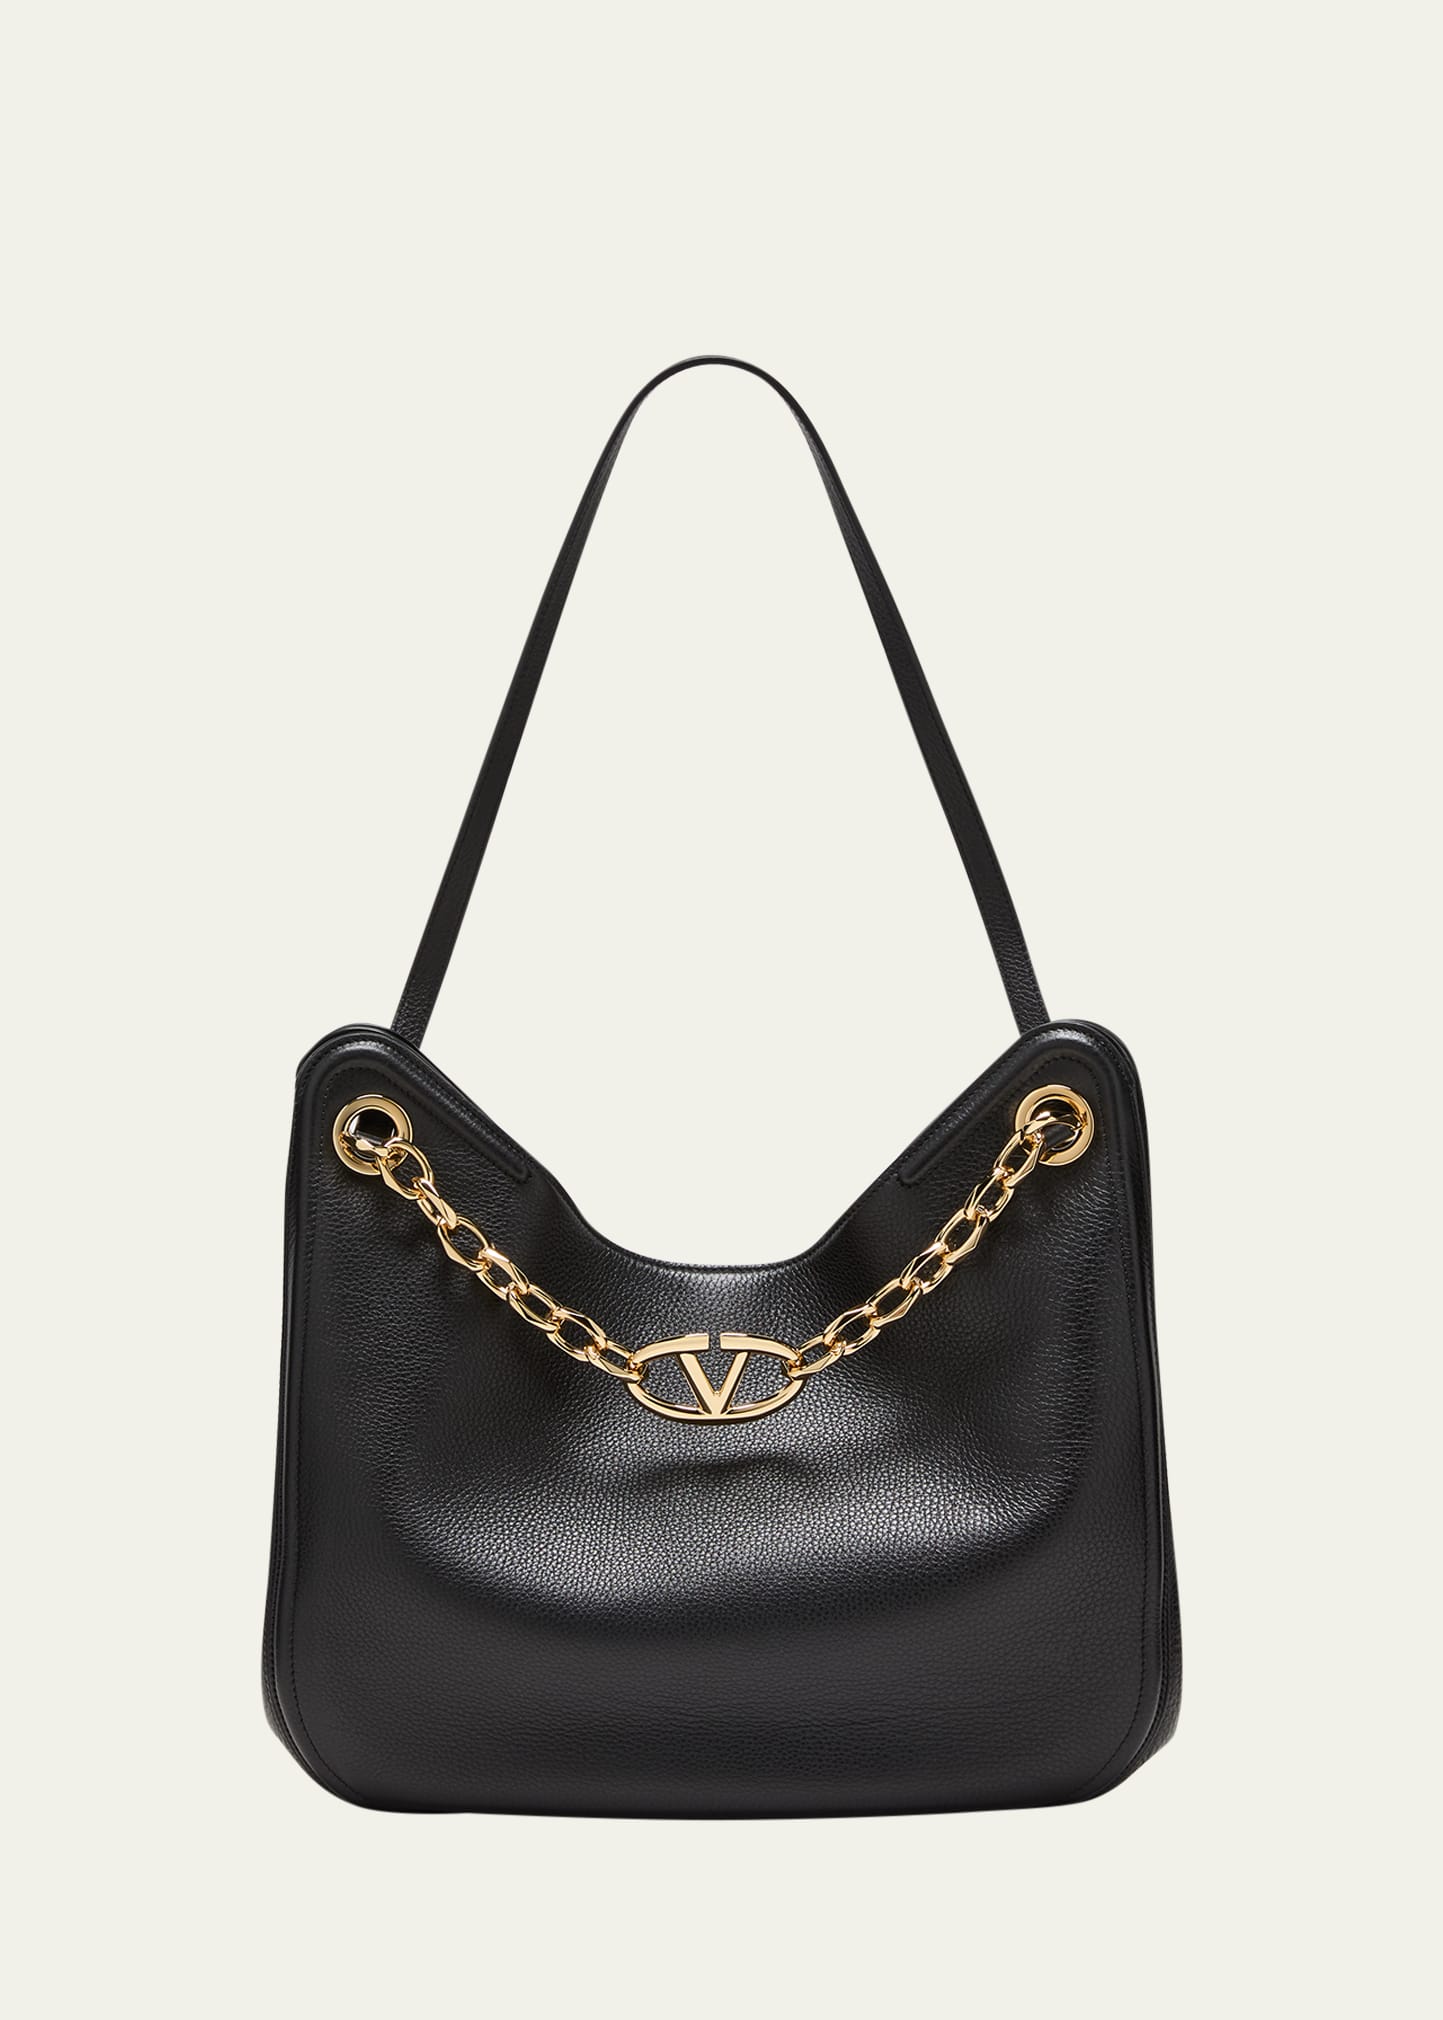 VLOGO Moon Leather Tote Bag